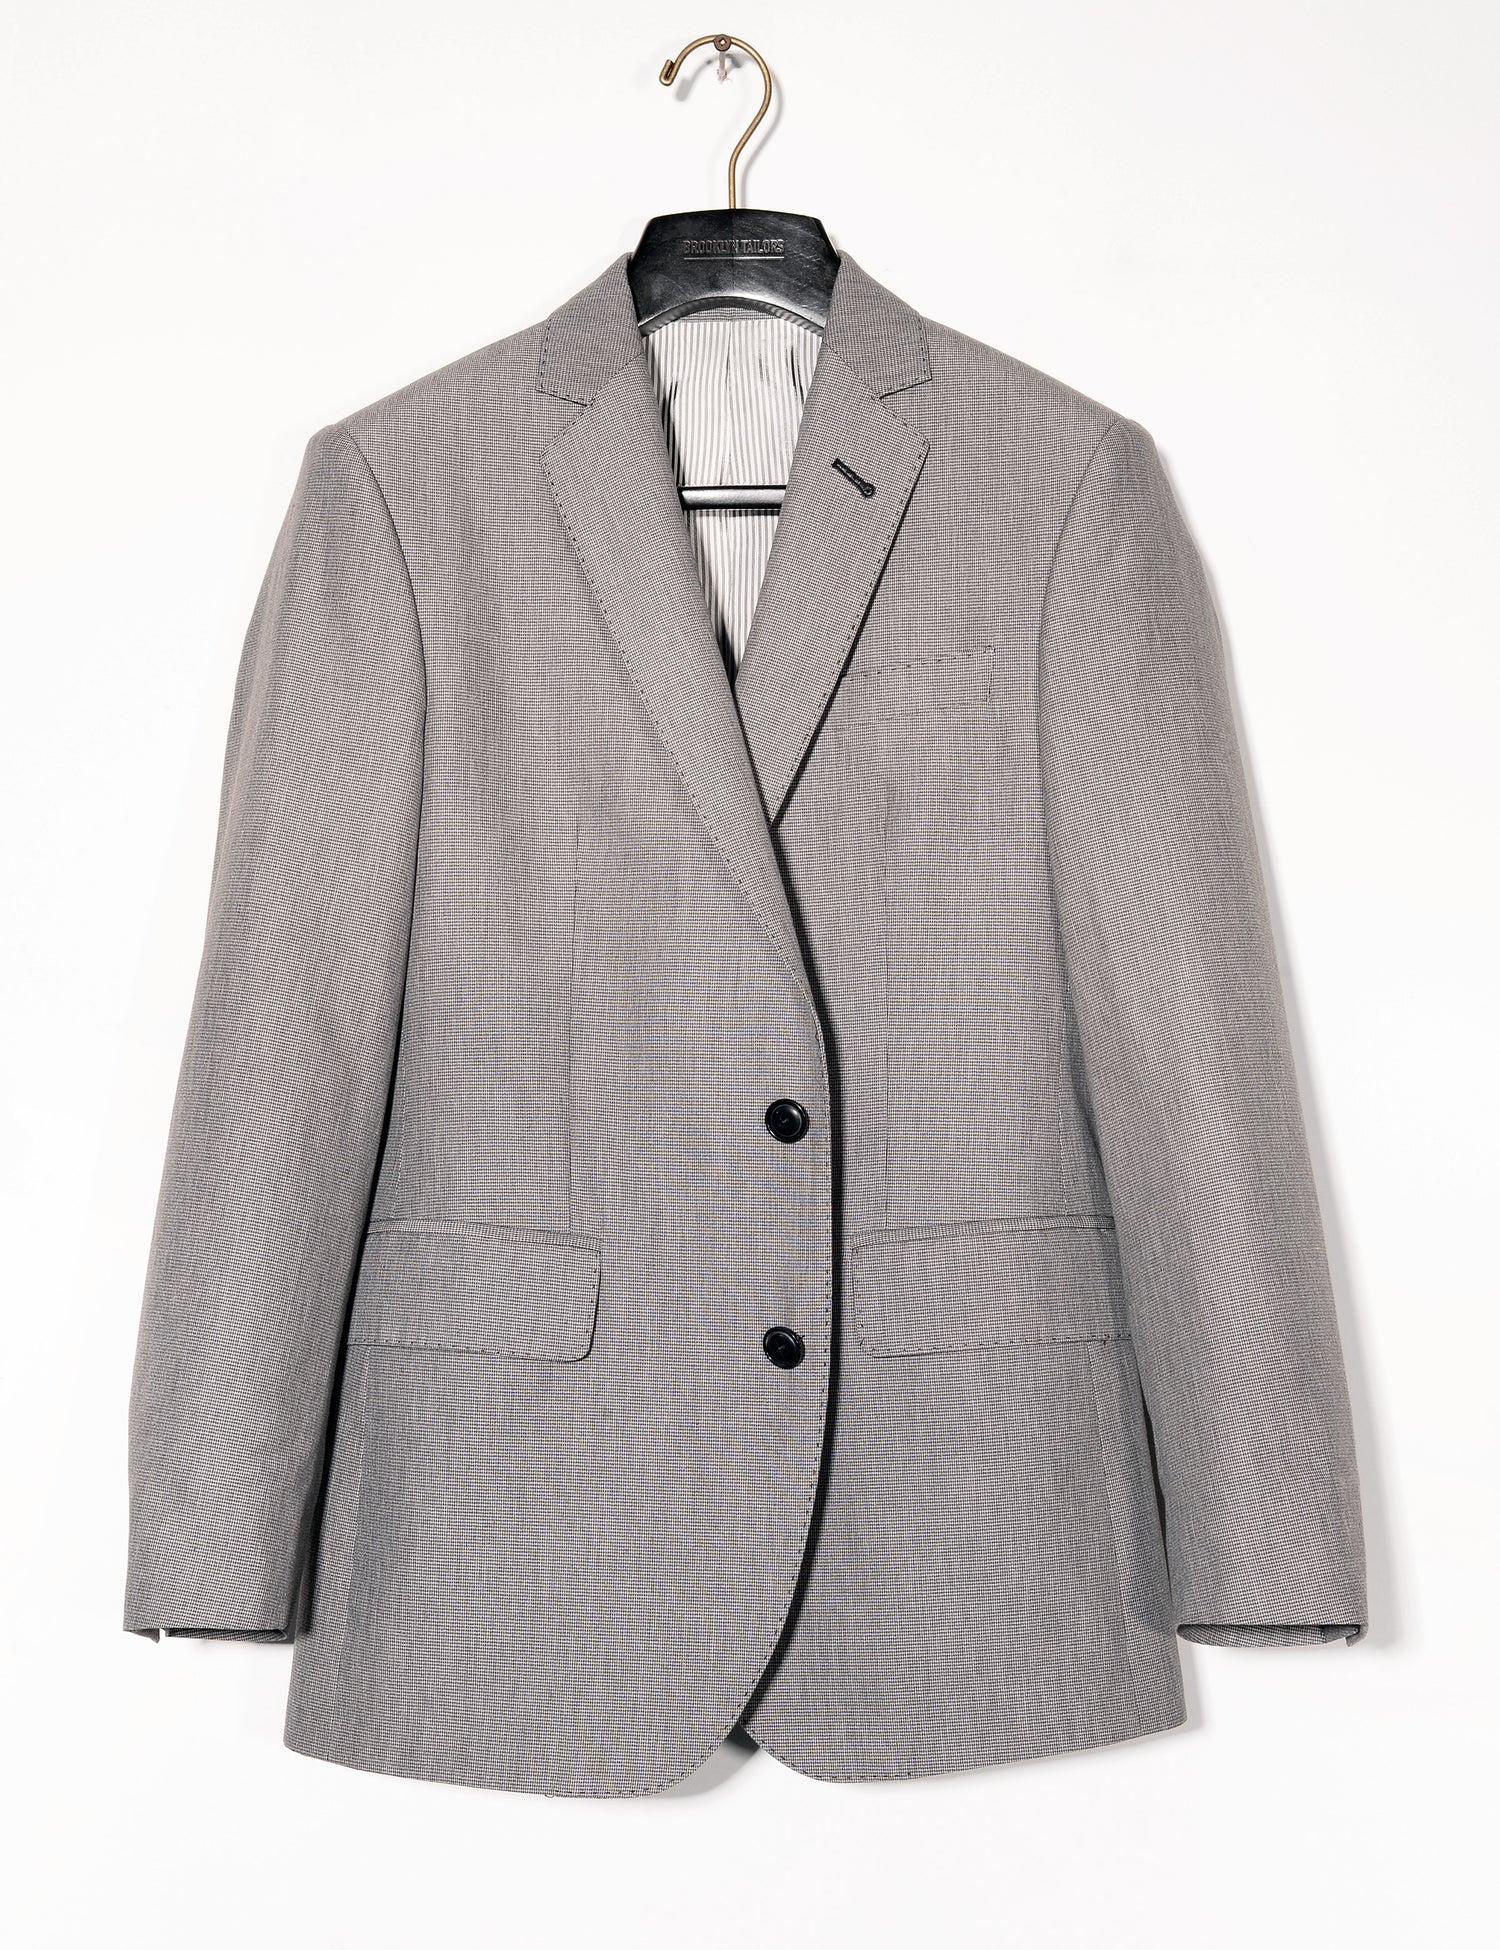 FINAL SALE: BKT50 Tailored Jacket in Cotton Micro Weave - Graphite –  Brooklyn Tailors